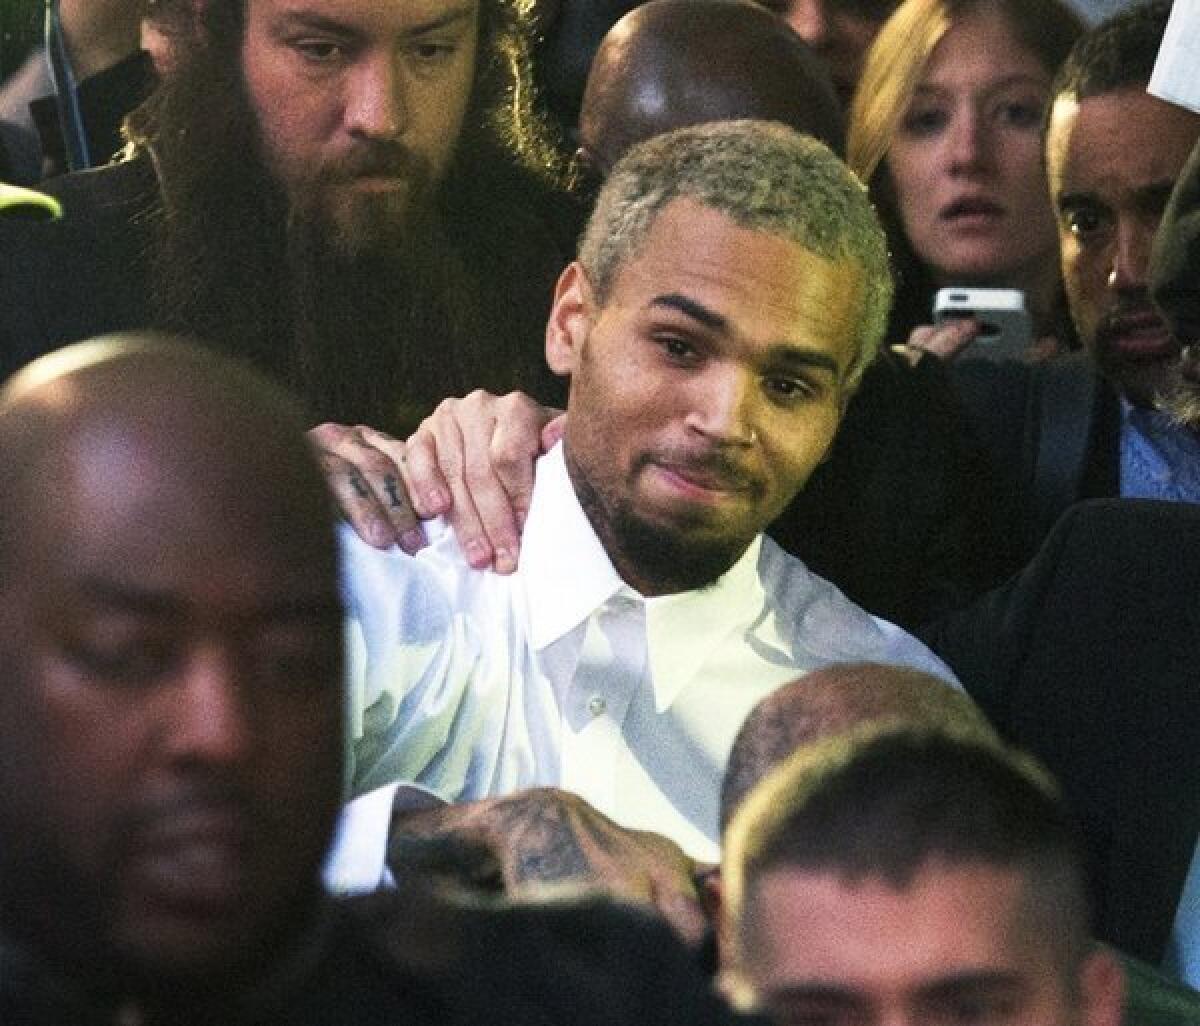 Singer Chris Brown waves to fans as he departs the H. Carl Moultrie courthouse on Monday in Washington, D.C. A charge against the Grammy Award-winning R&B; singer has been reduced to a misdemeanor and he was ordered released after his arrest Sunday following an altercation outside a Washington hotel.